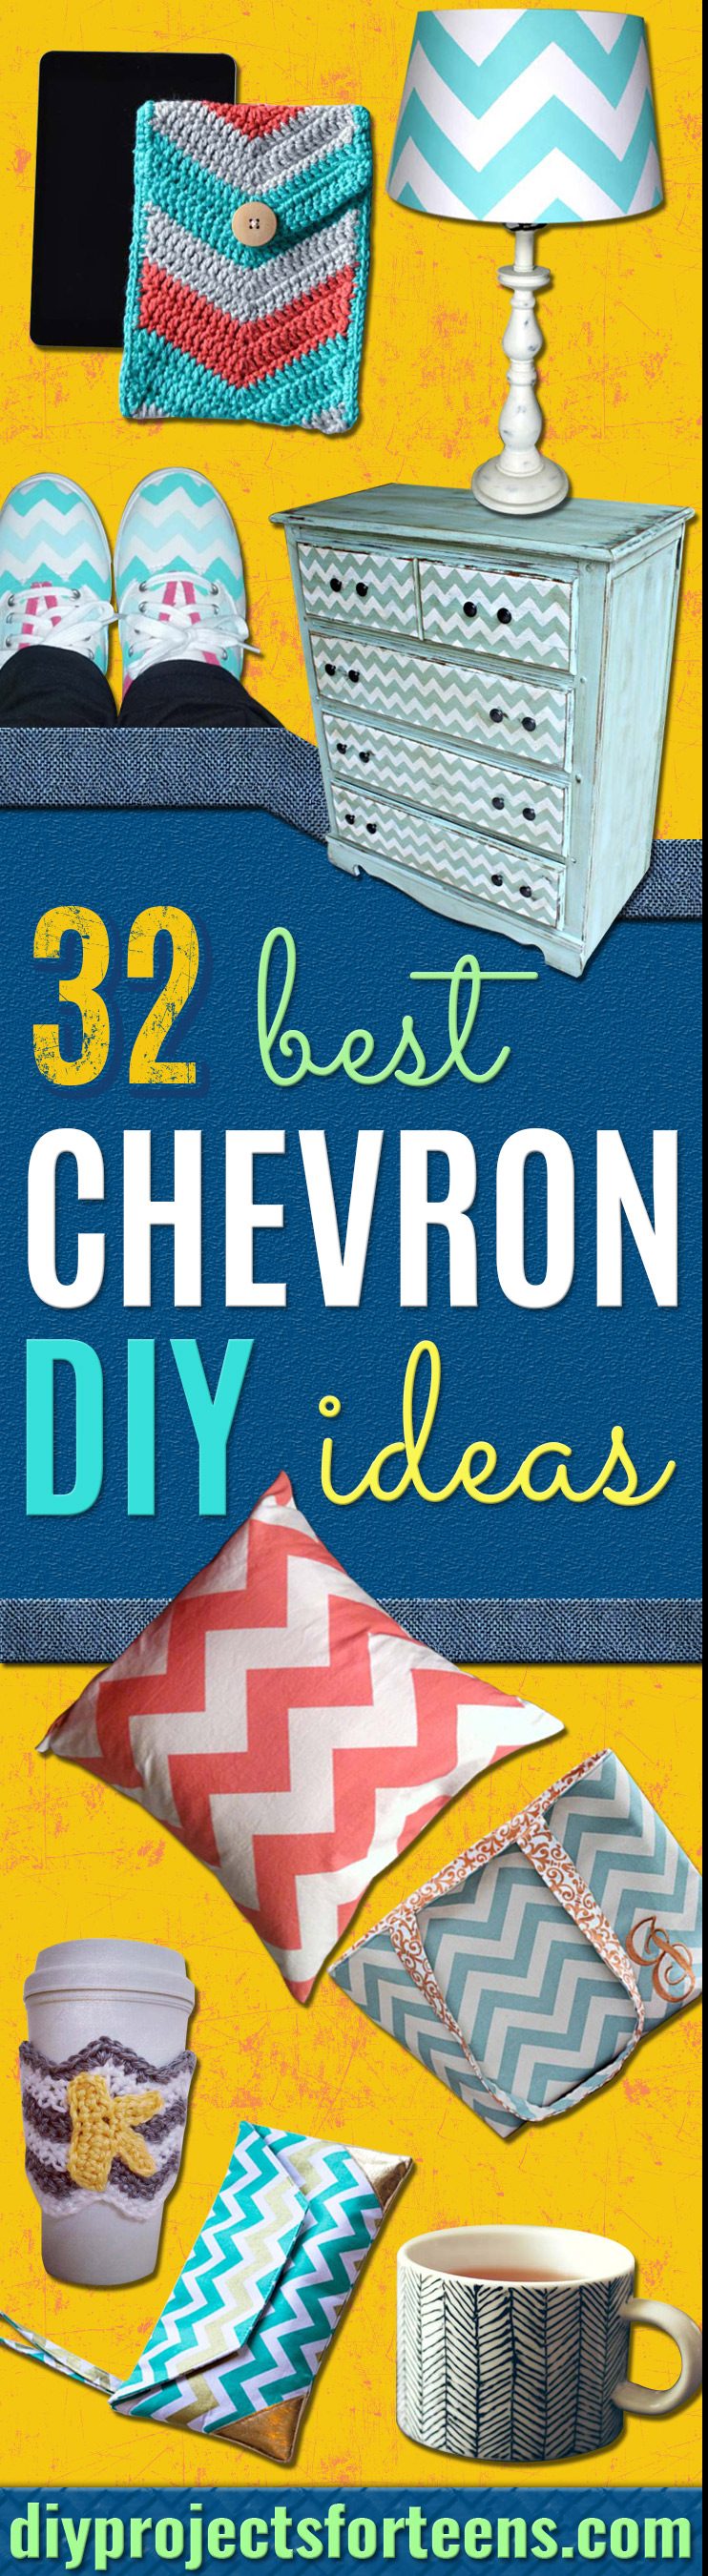 Best DIY Chevron Projects - DIY Wall Art, Home and Room Decor, Canvas Crafts With Chevrons, Furniture and Chairs, Decorations With Paint Ideas Using Chevron Patterns for Bedroom, Bathroom and Teens Rooms. Learn How To Tape Chevron Art With Easy To Follow Step by Step Tutorials 